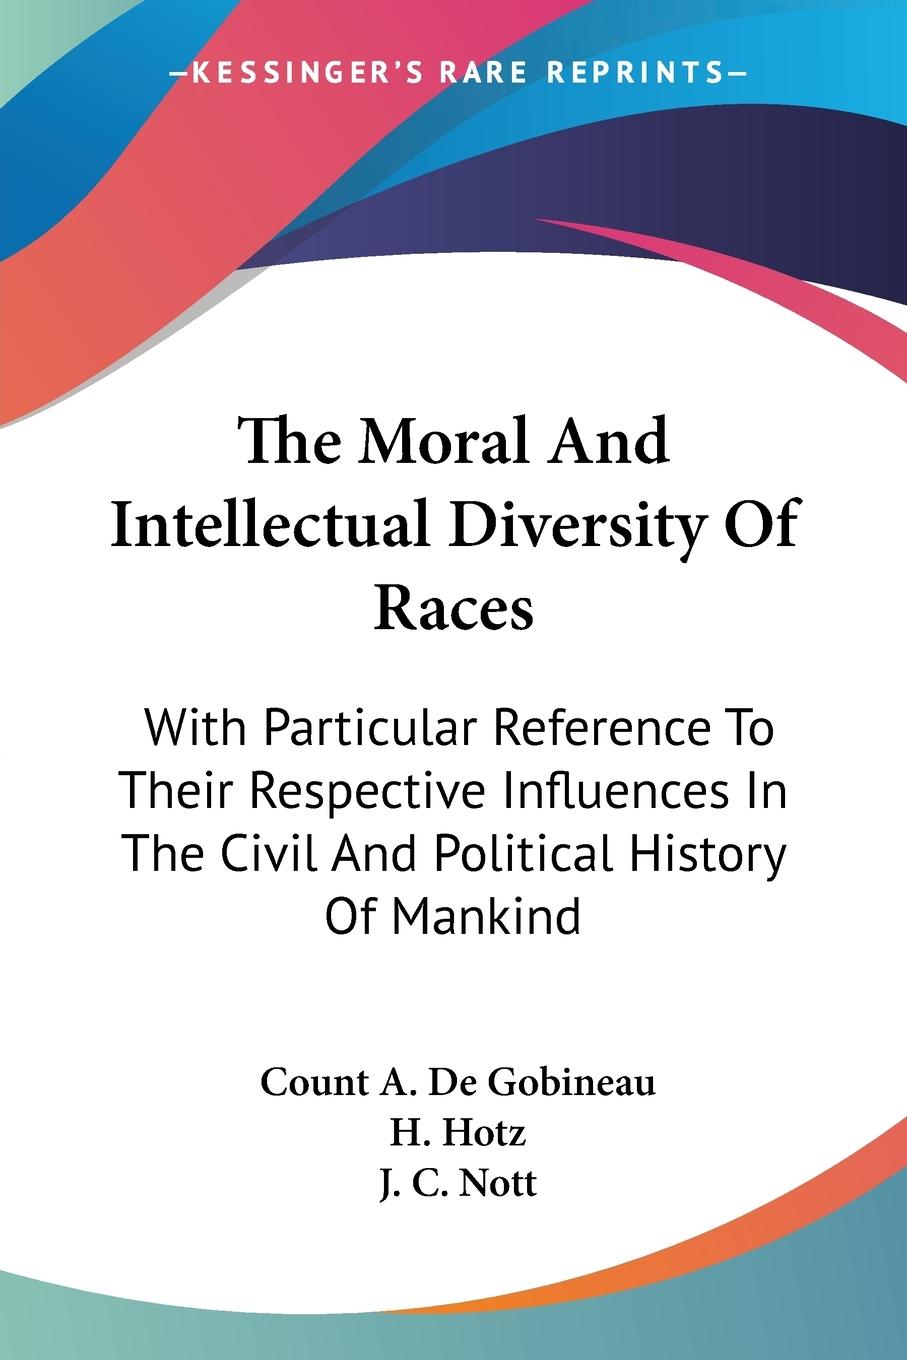 The Moral And Intellectual Diversity Of Races - De Gobineau, Count A.